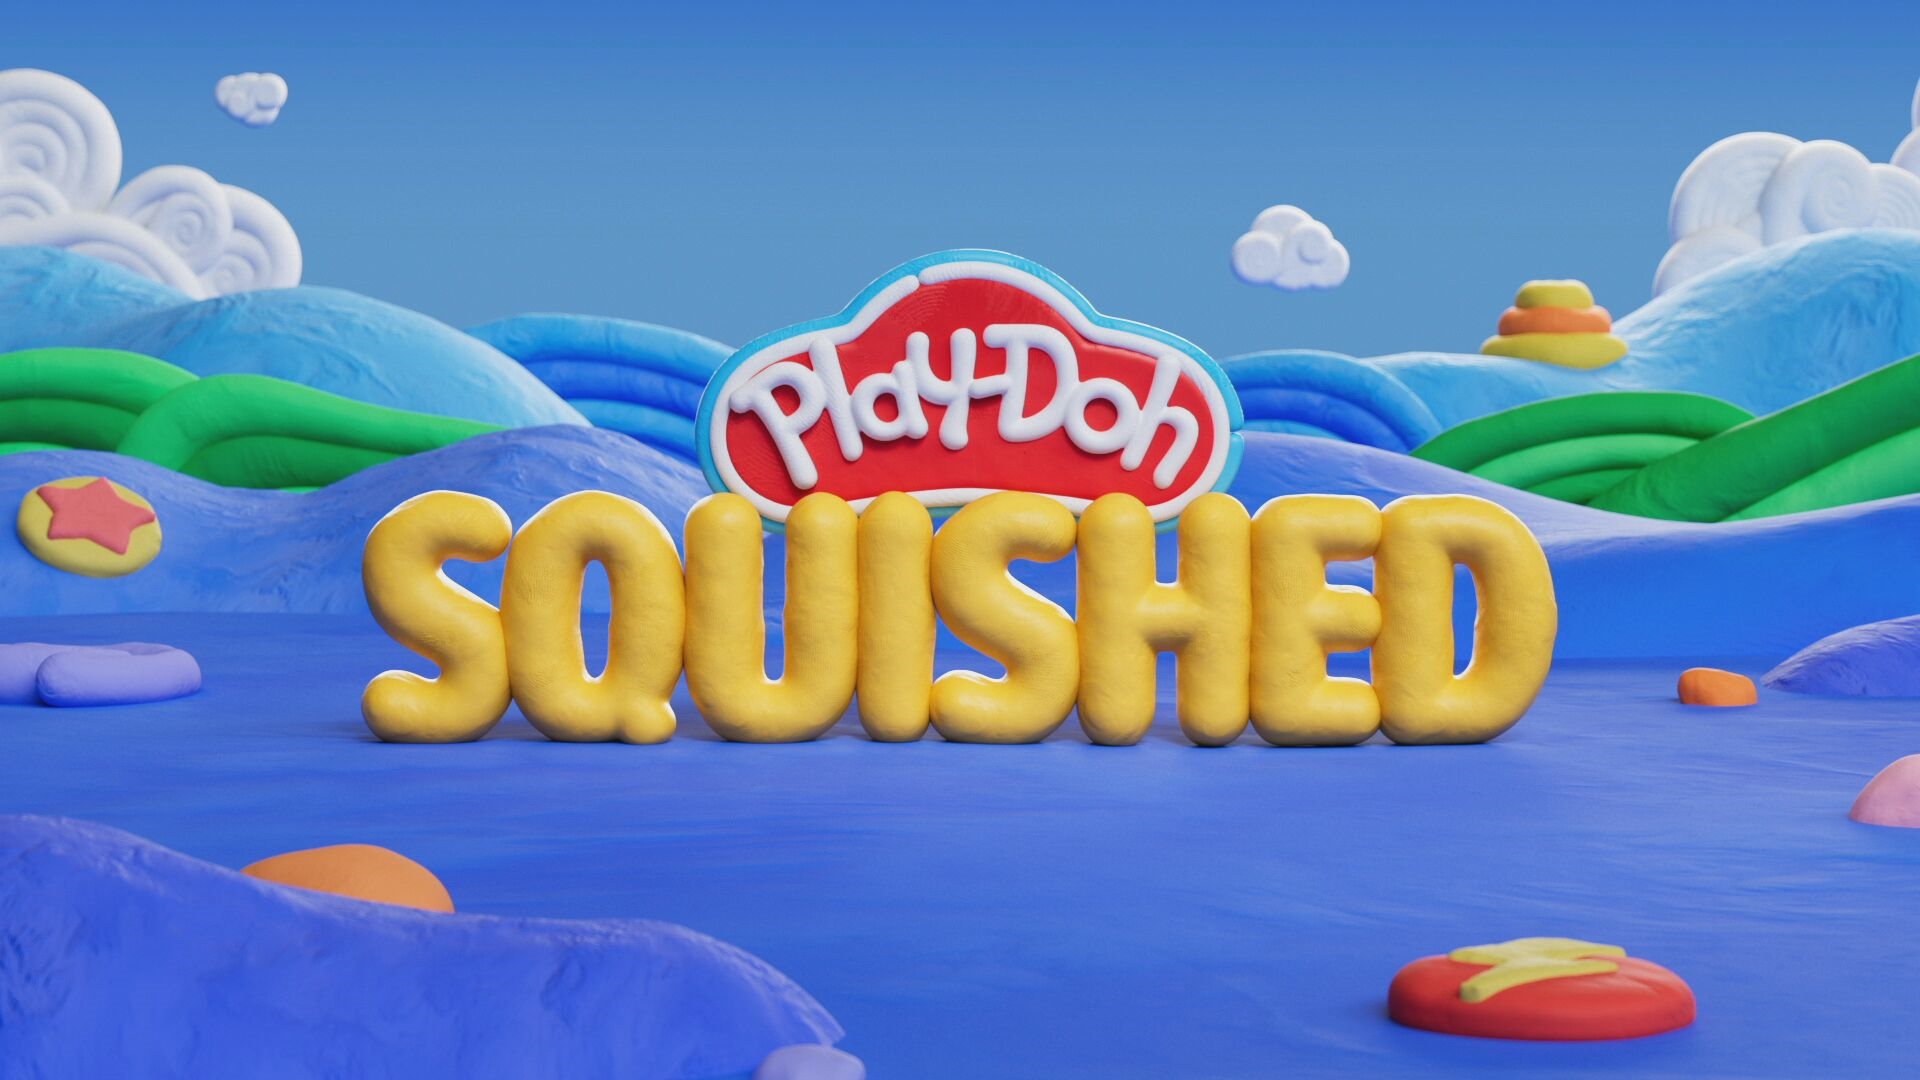 Watch Play-Doh Squished - Season 1